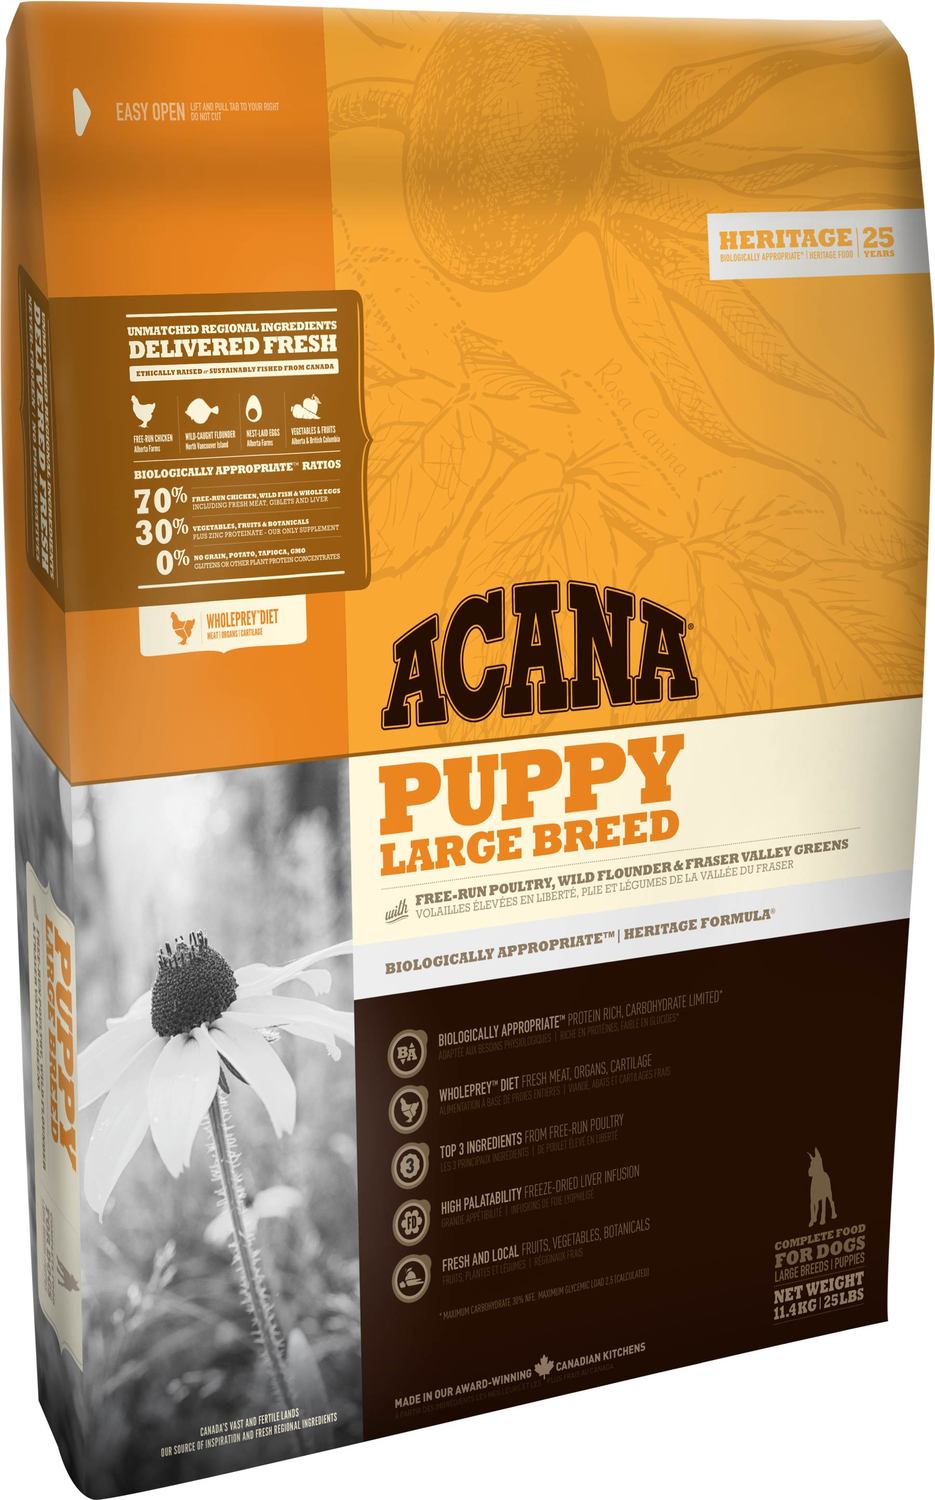 Acana Puppy Large Breed - zoom